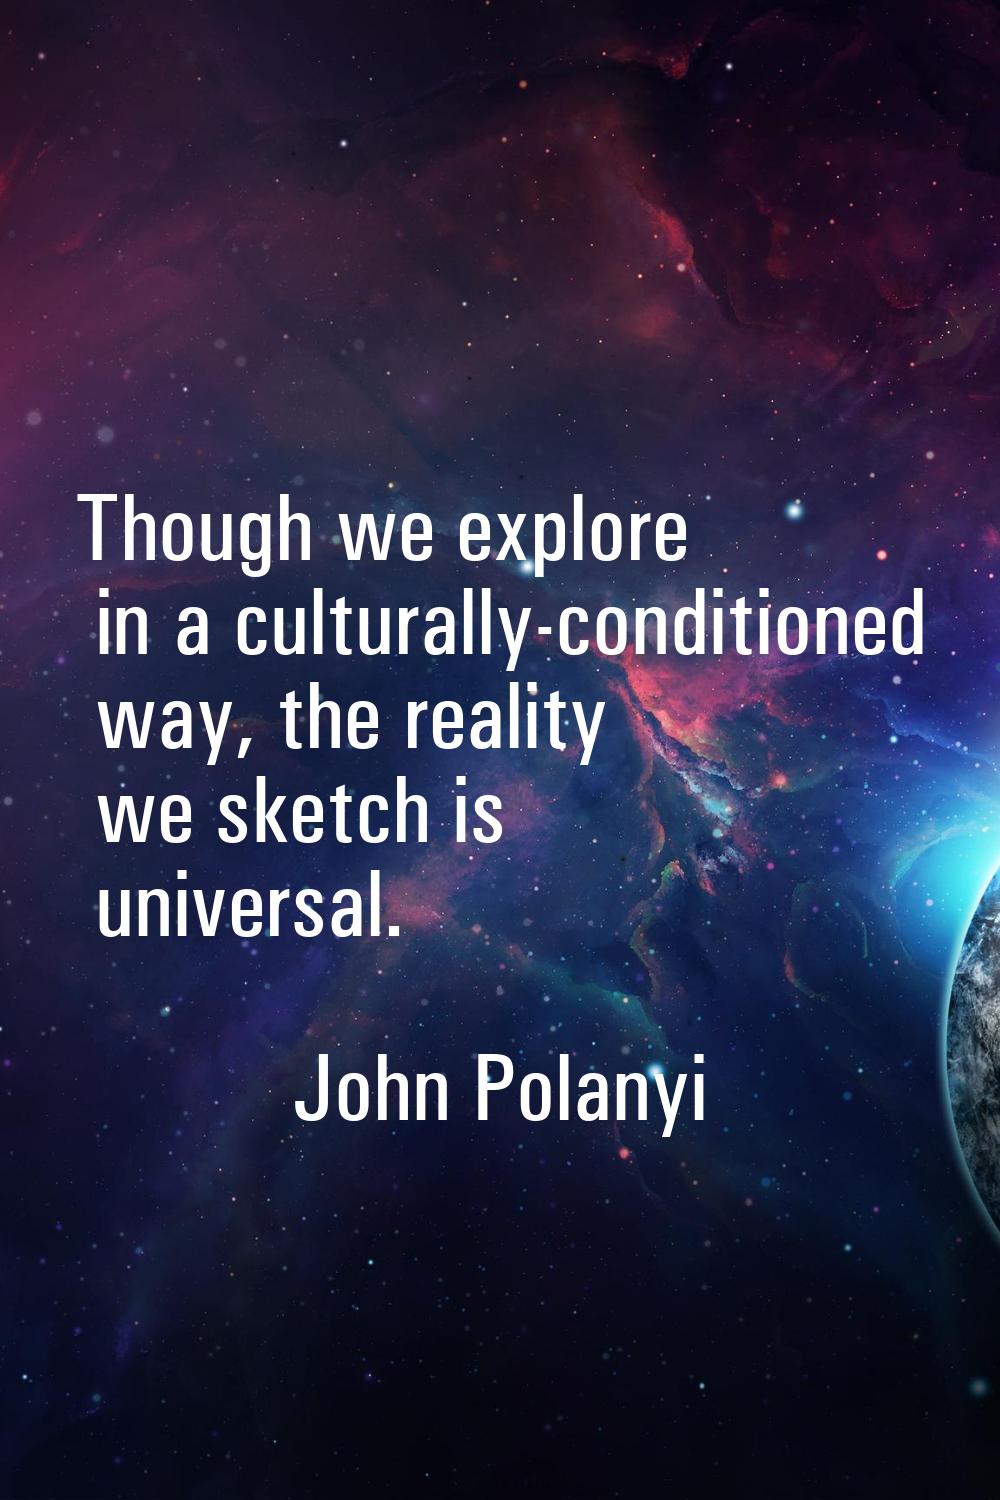 Though we explore in a culturally-conditioned way, the reality we sketch is universal.